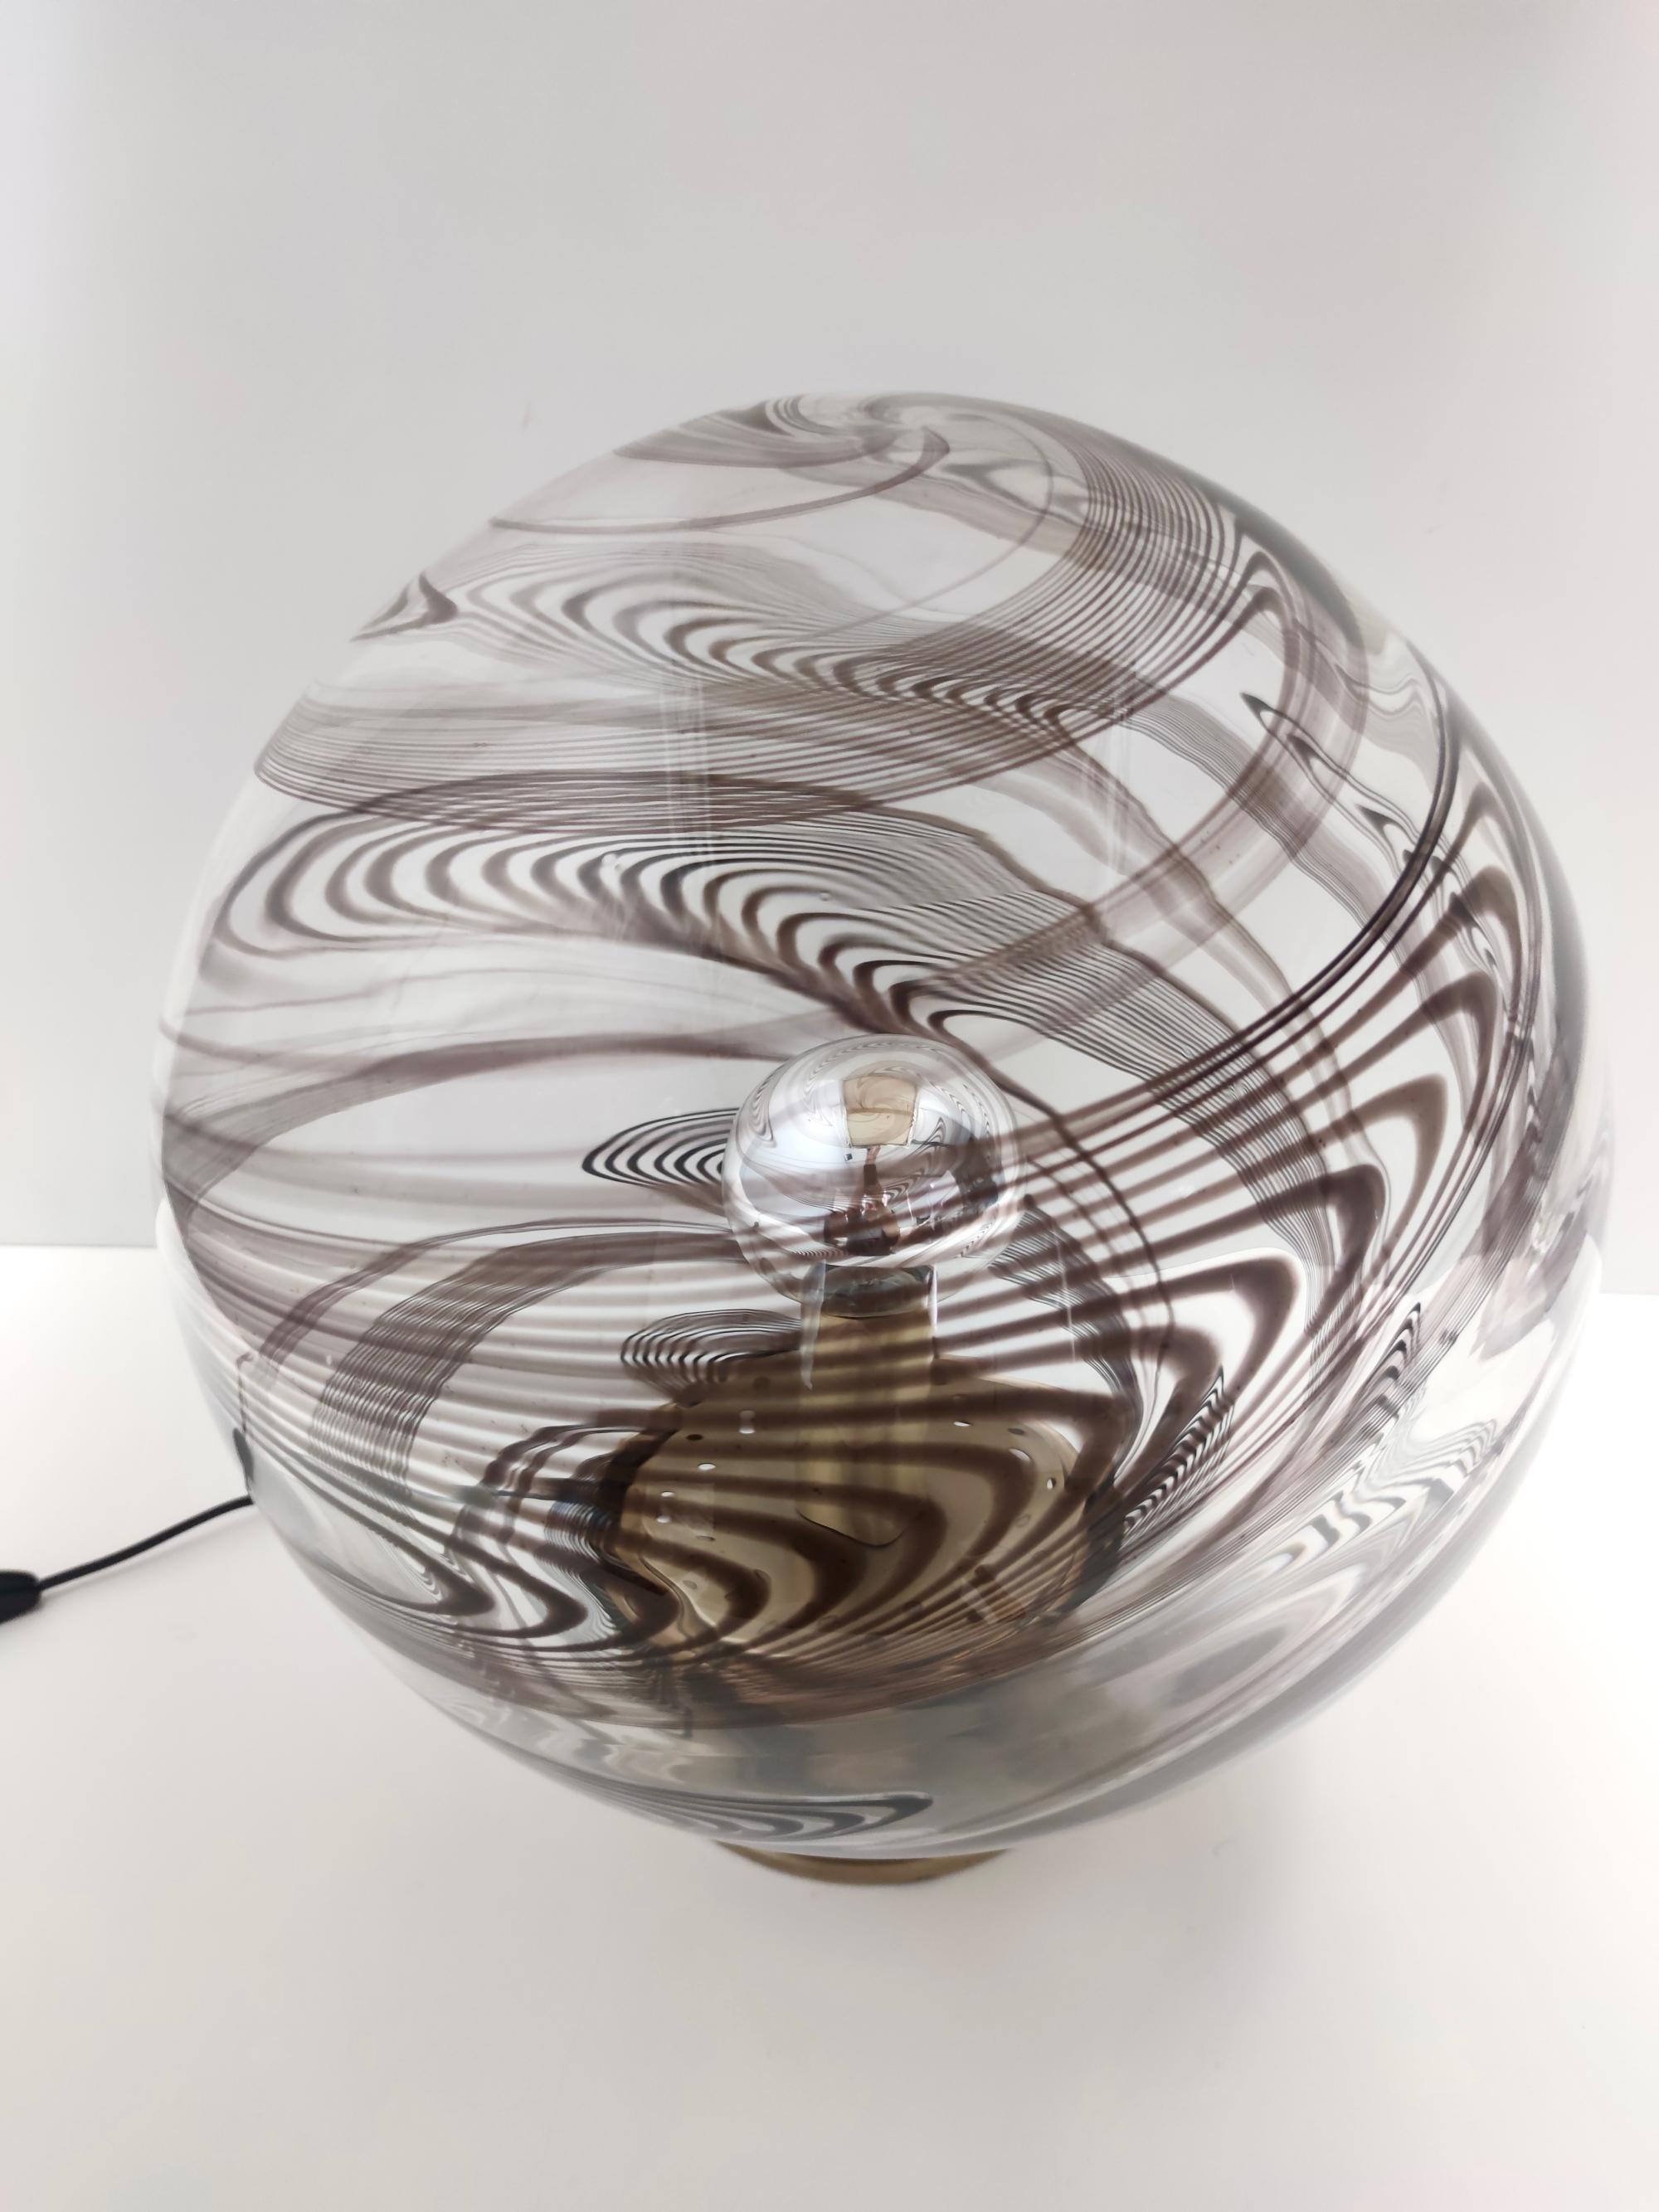 Postmodern Spheric Glass Table Lamp by Lino Tagliapietra for La Murrina, Italy In Excellent Condition For Sale In Bresso, Lombardy